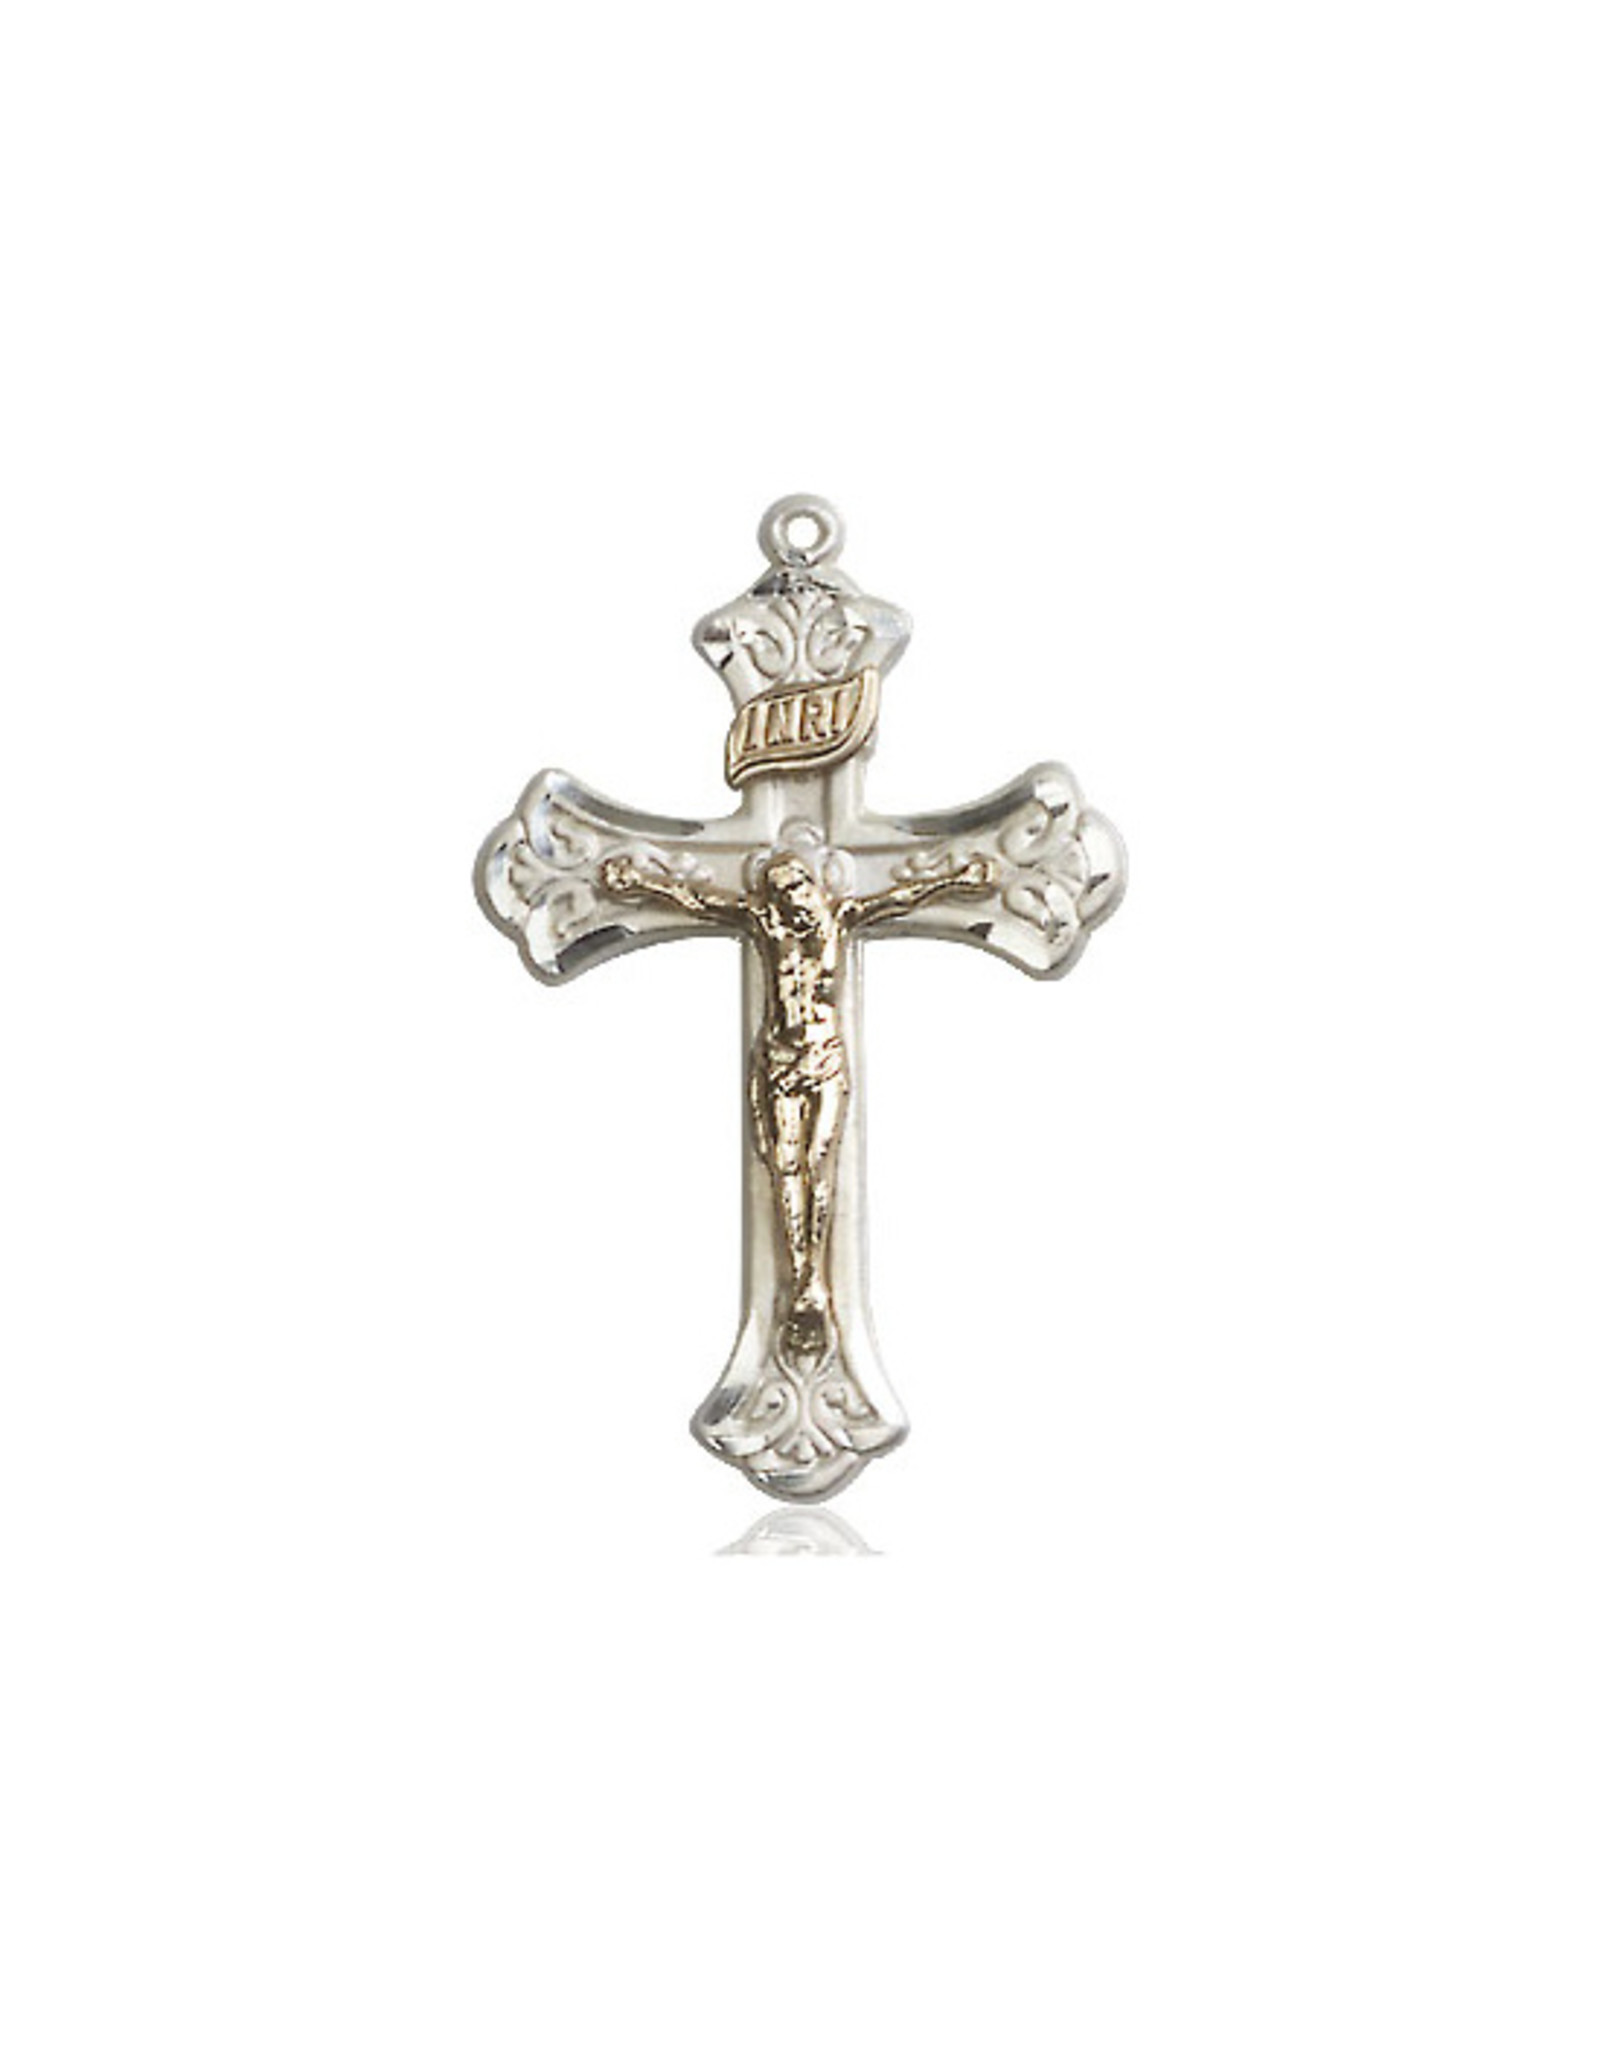 Bliss Crucifix Medal, Two-Tone Gold Filled/Sterling Silver 2622GF/SS